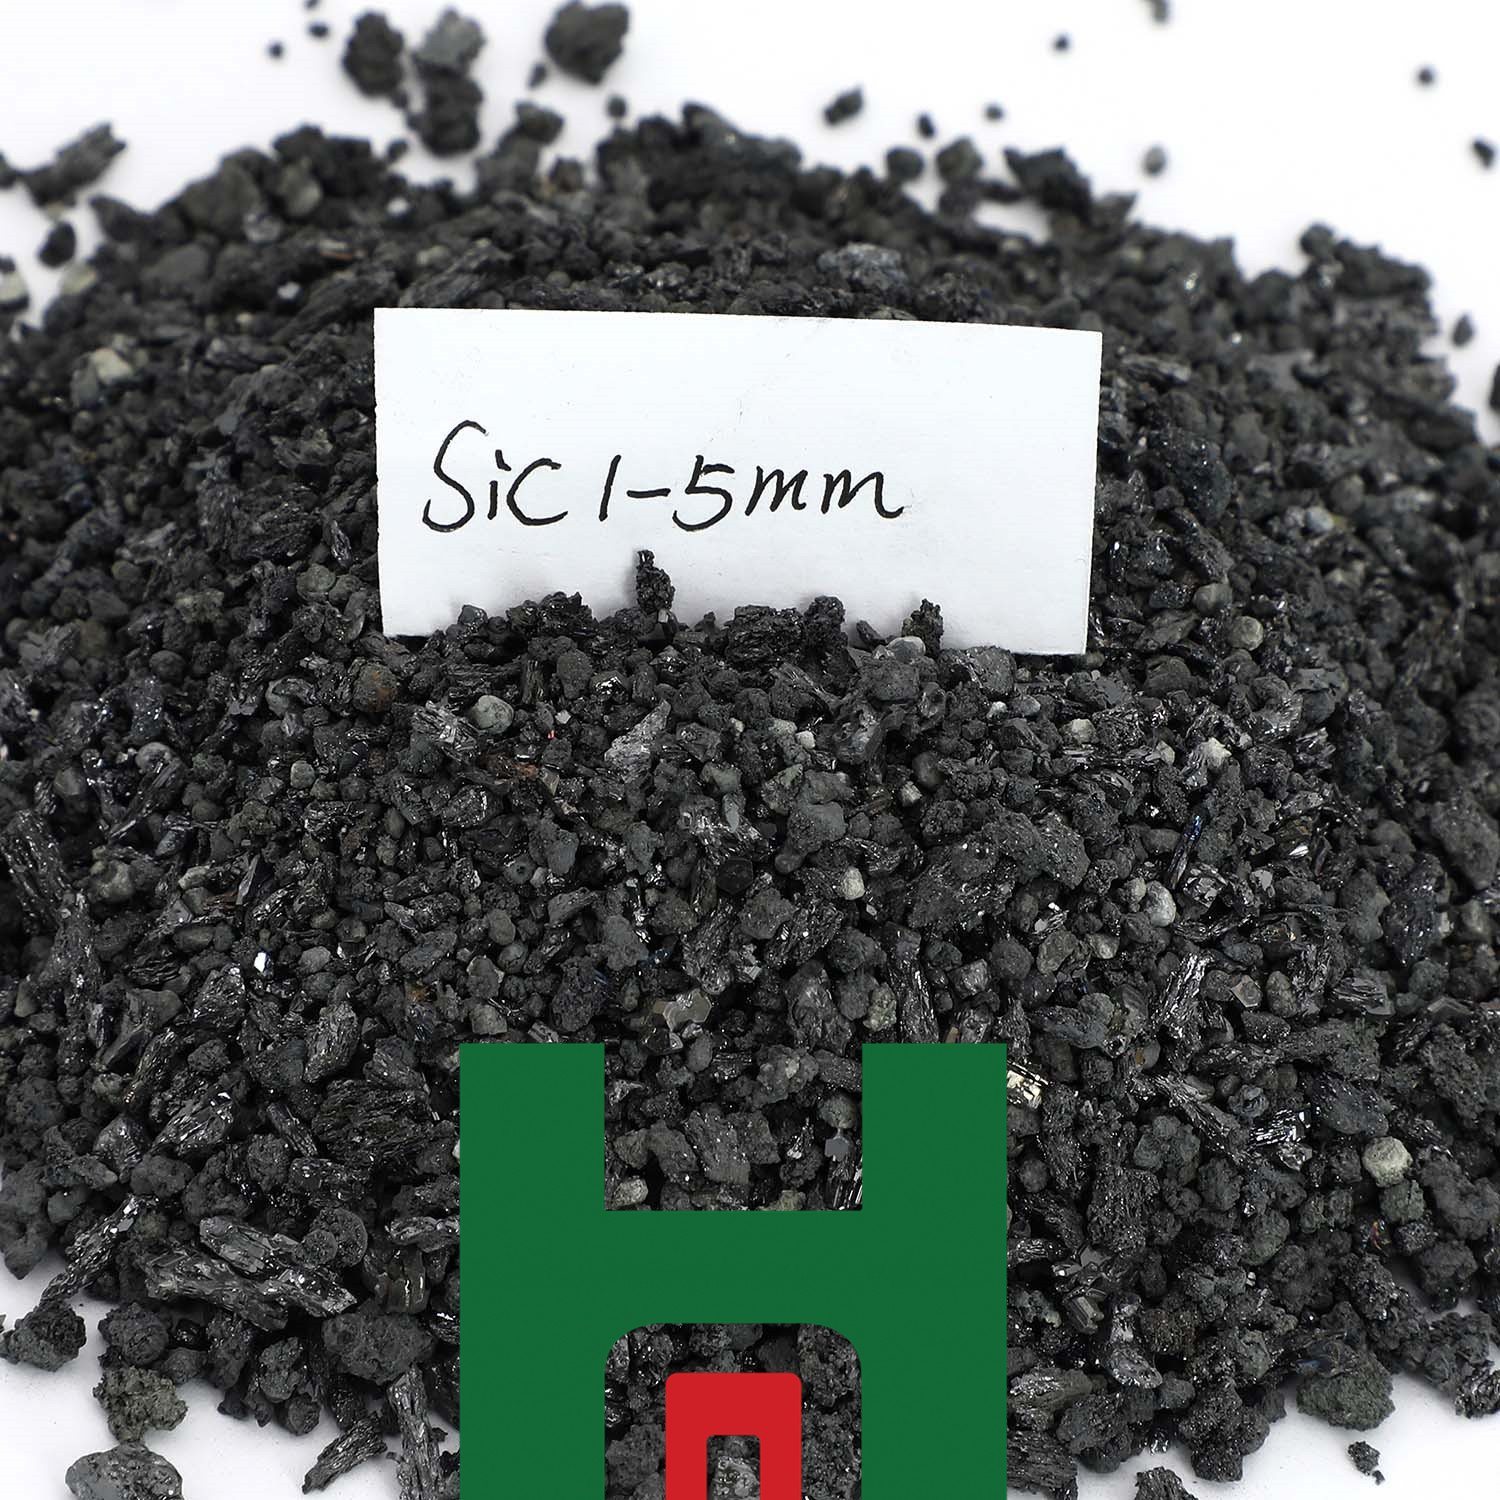 Silicon carbide is widely used in many fields